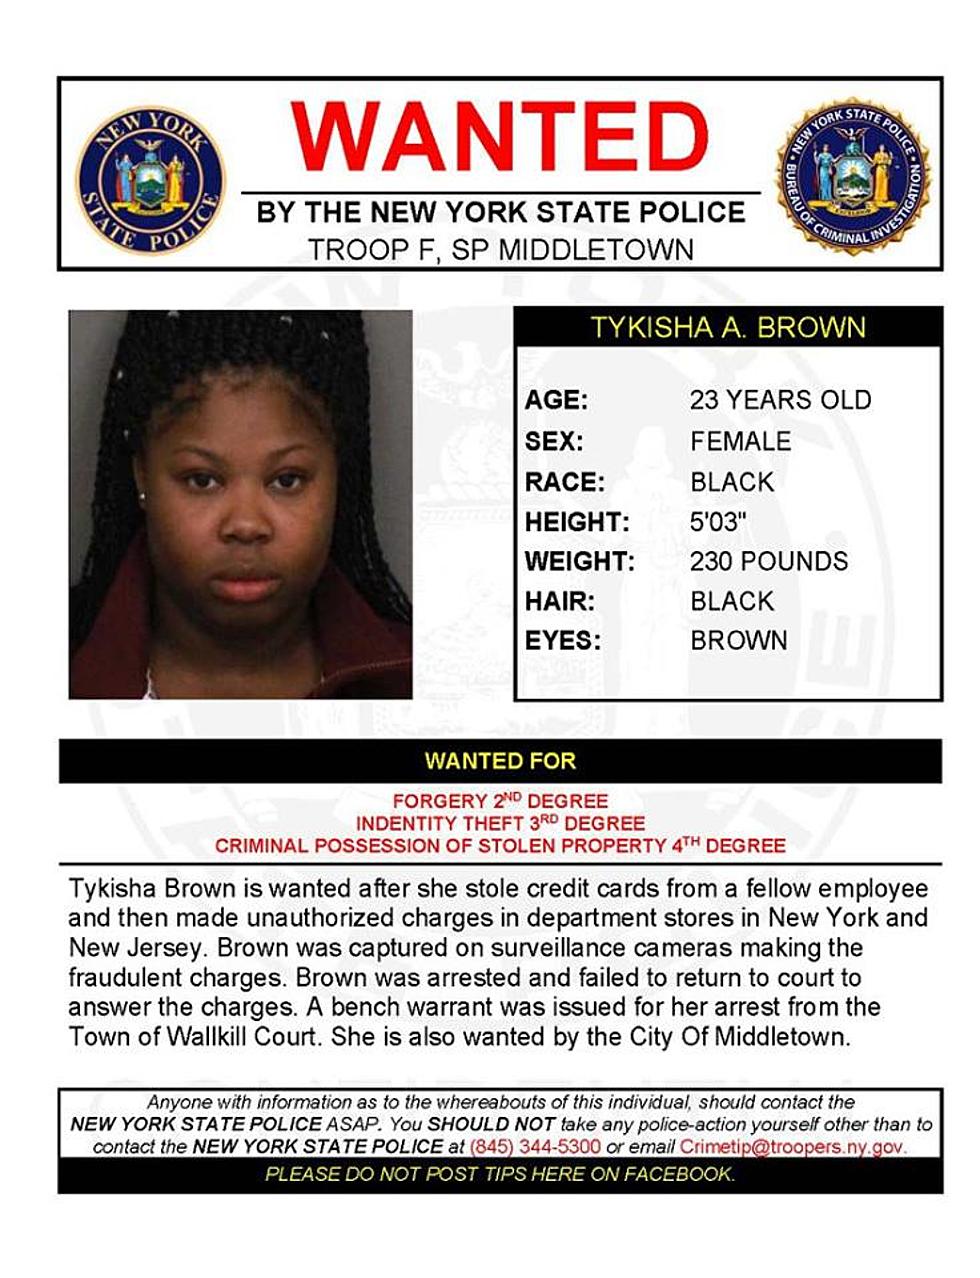 Warrant Wednesday: Orange County Woman Wanted For Identity Theft and Forgery